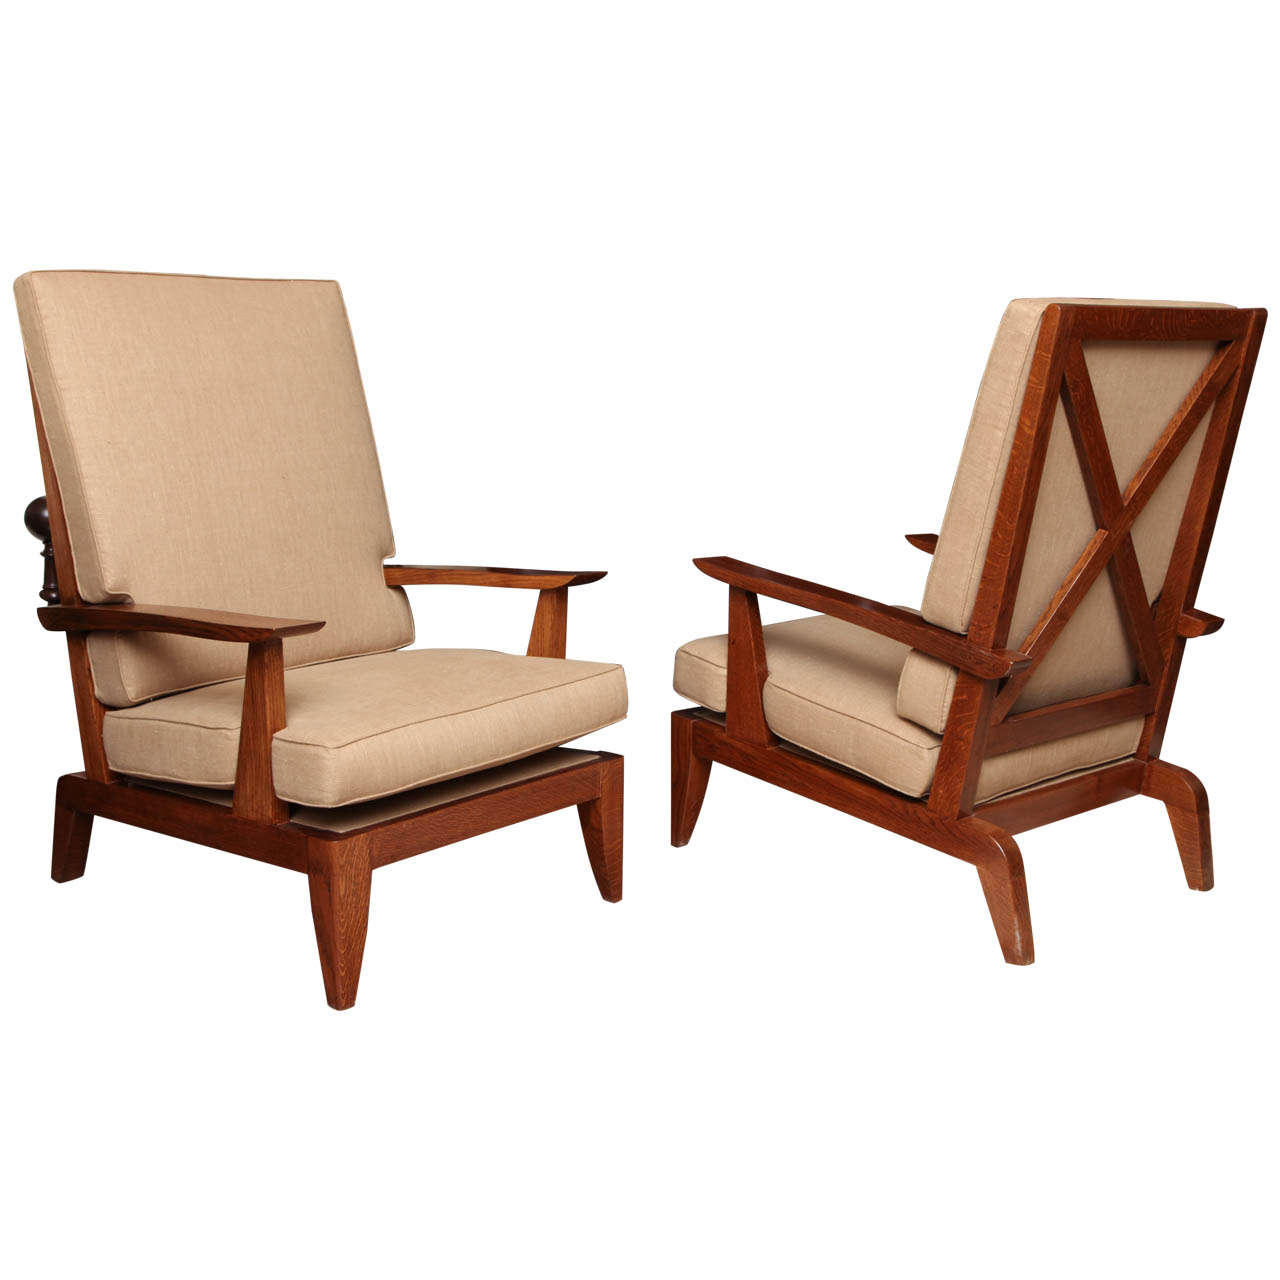 Pair Of Large Oak Armchairs, French C. 1940